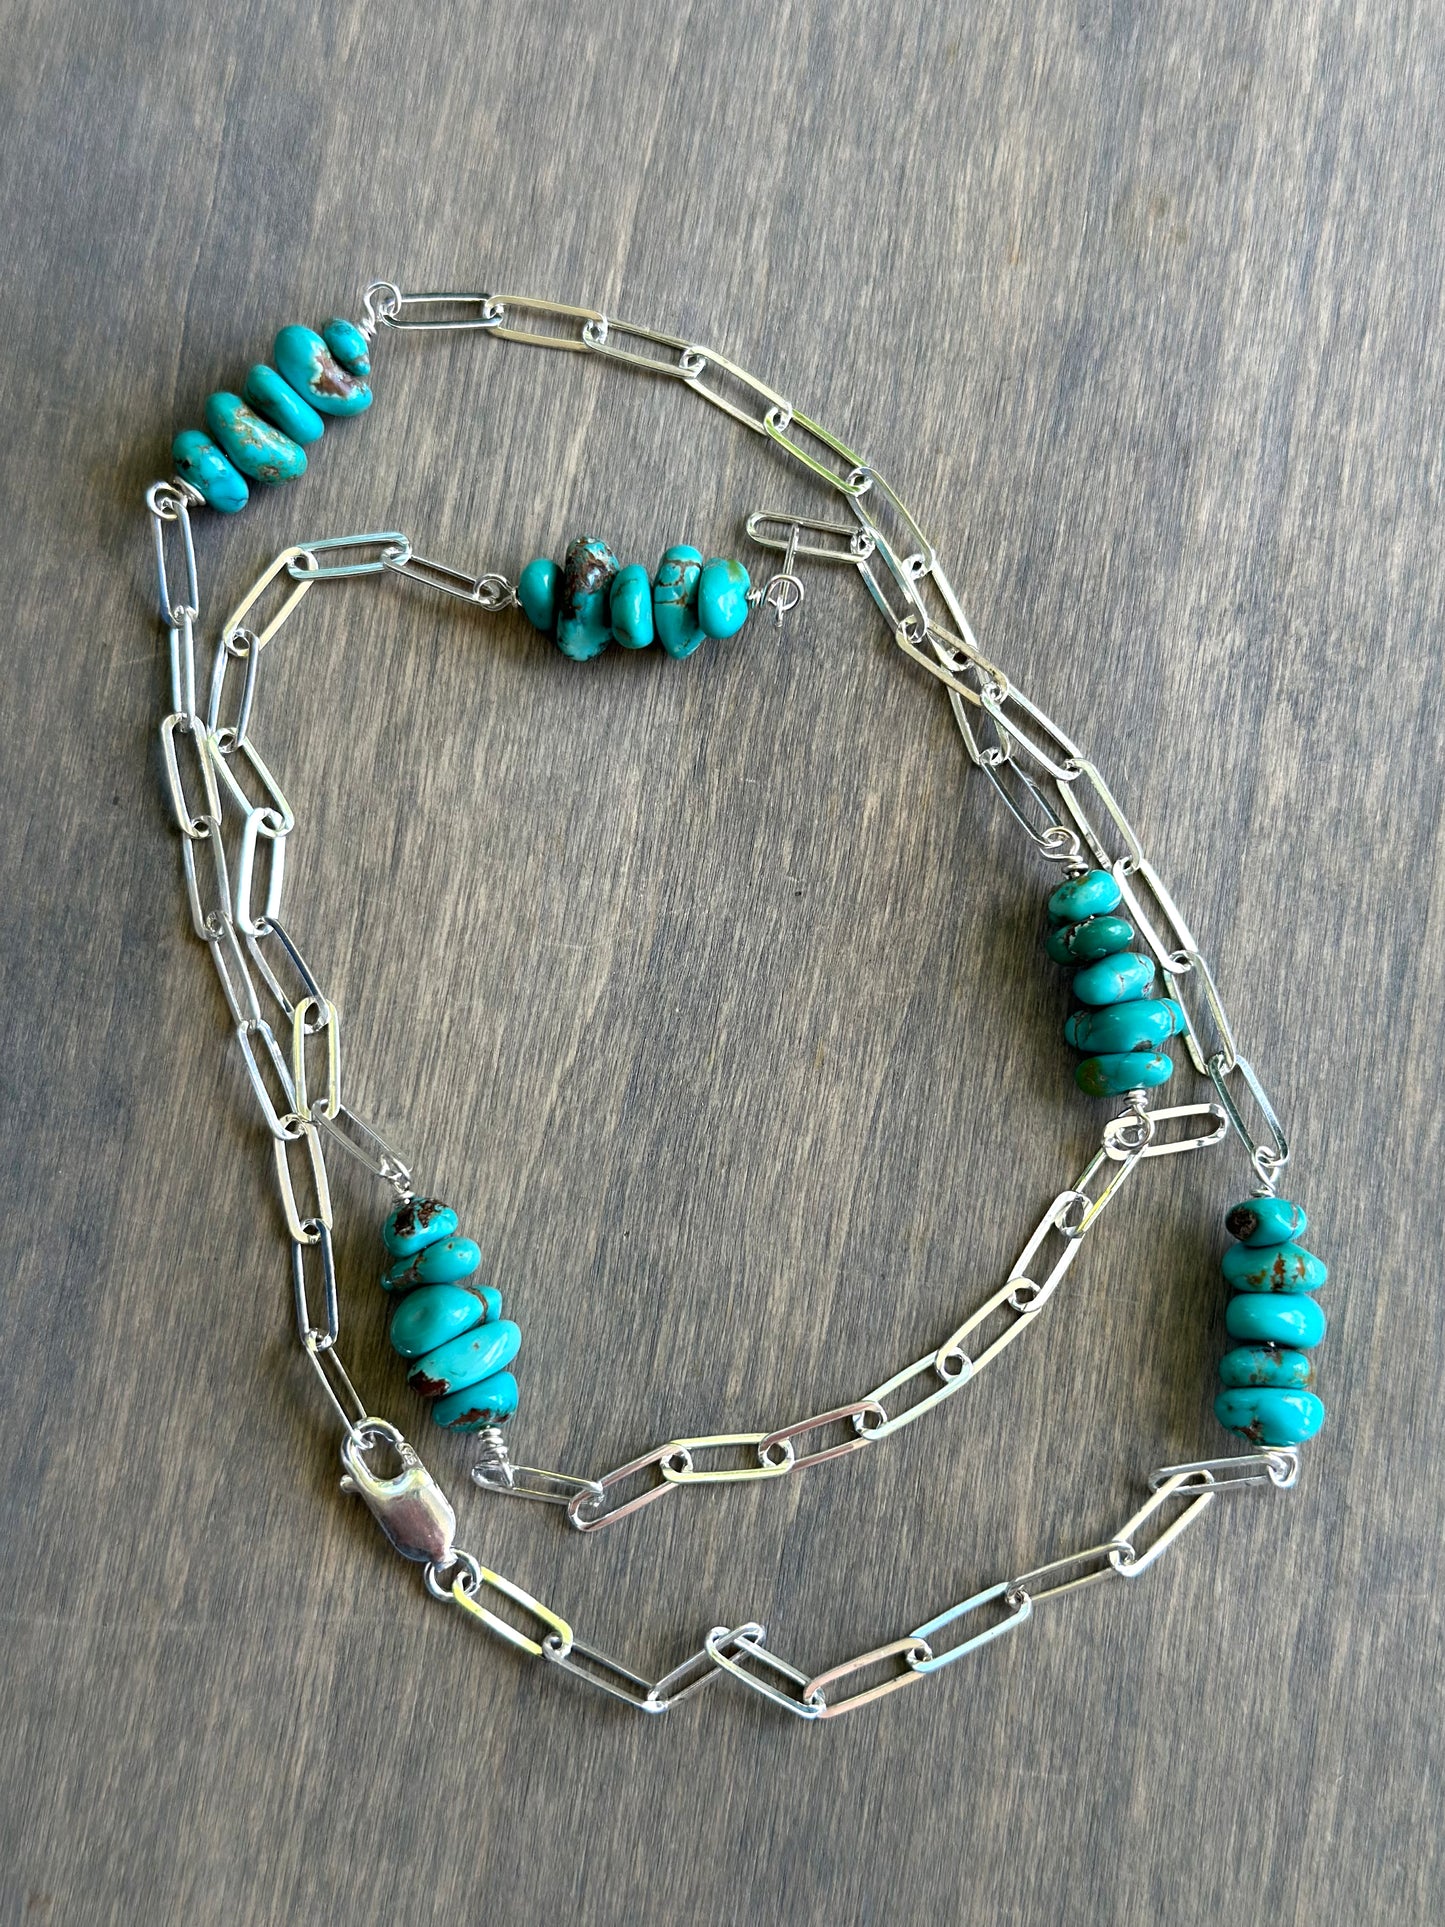 Sierra Nevada Turquoise Bead Paperclip Necklace